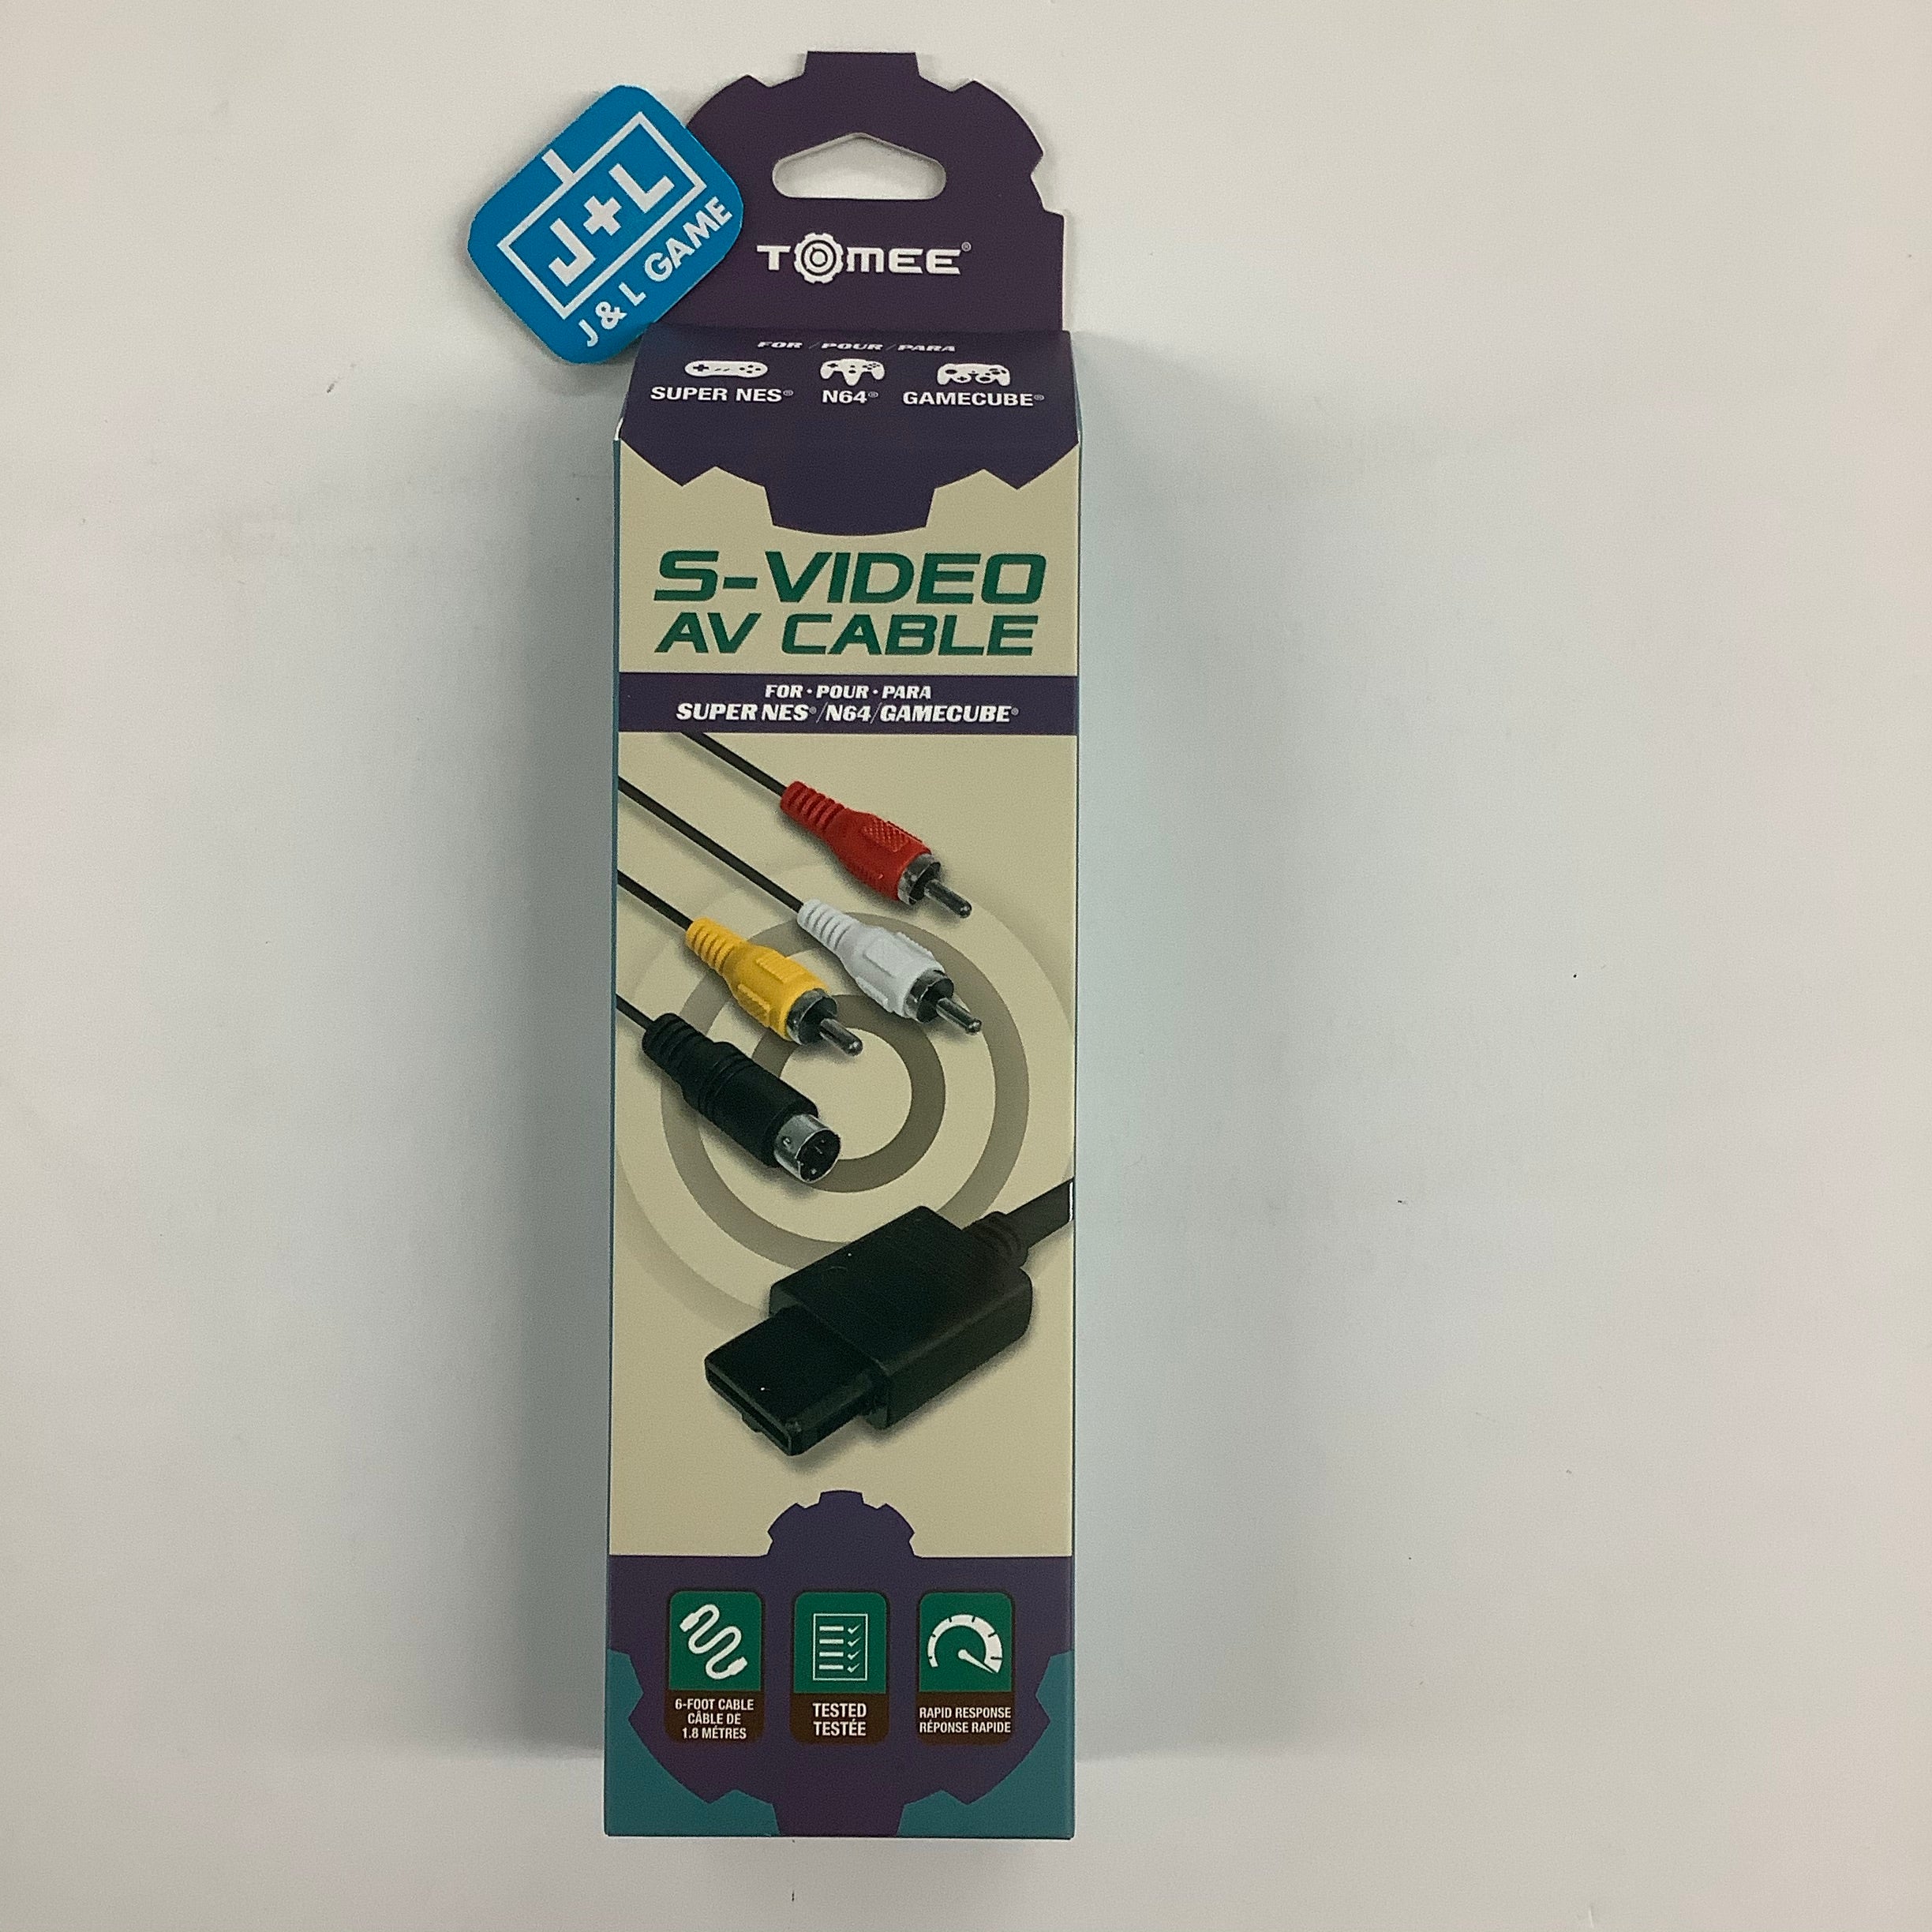 Tomee S-Video AV Cable for SNES/N64/GameCube Accessories Tomee   